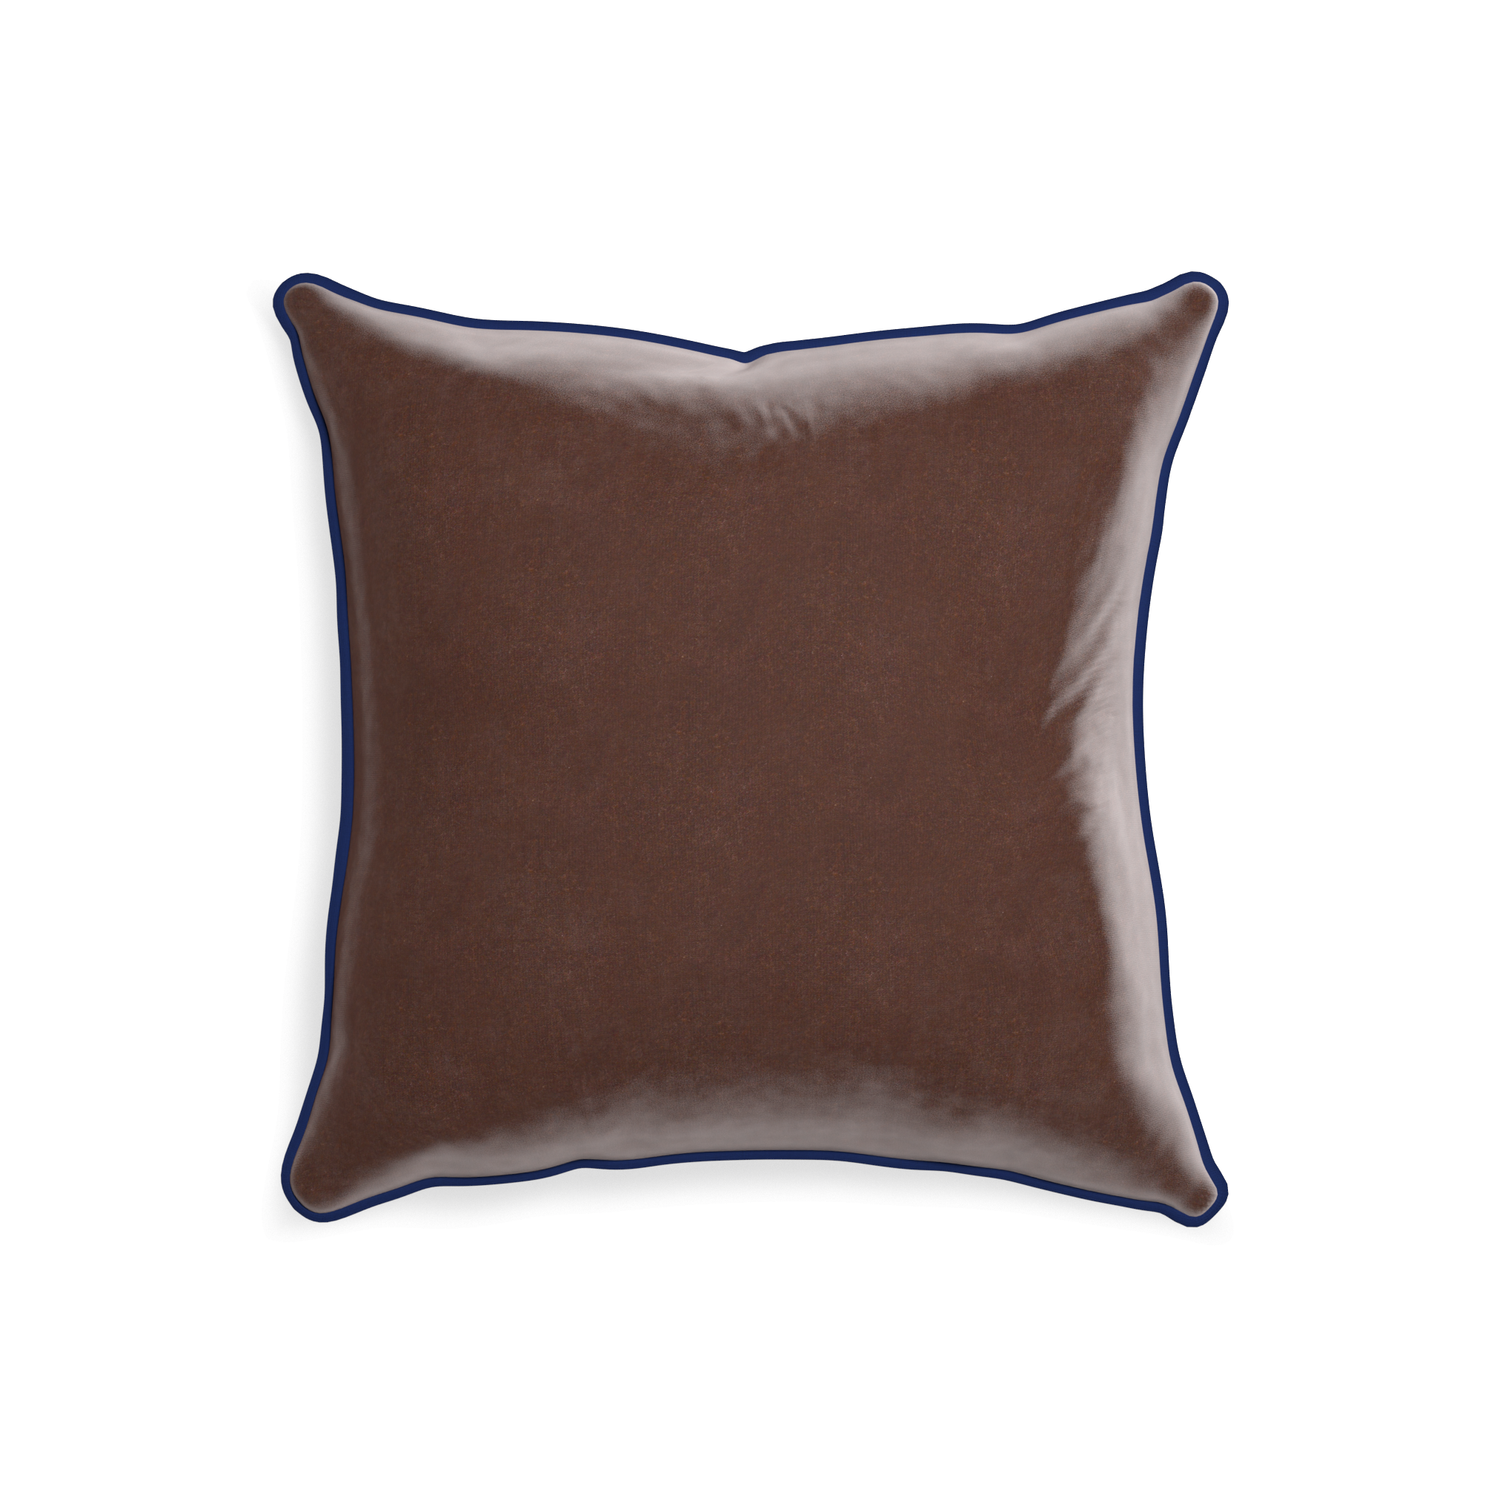 20-square walnut velvet custom pillow with midnight piping on white background